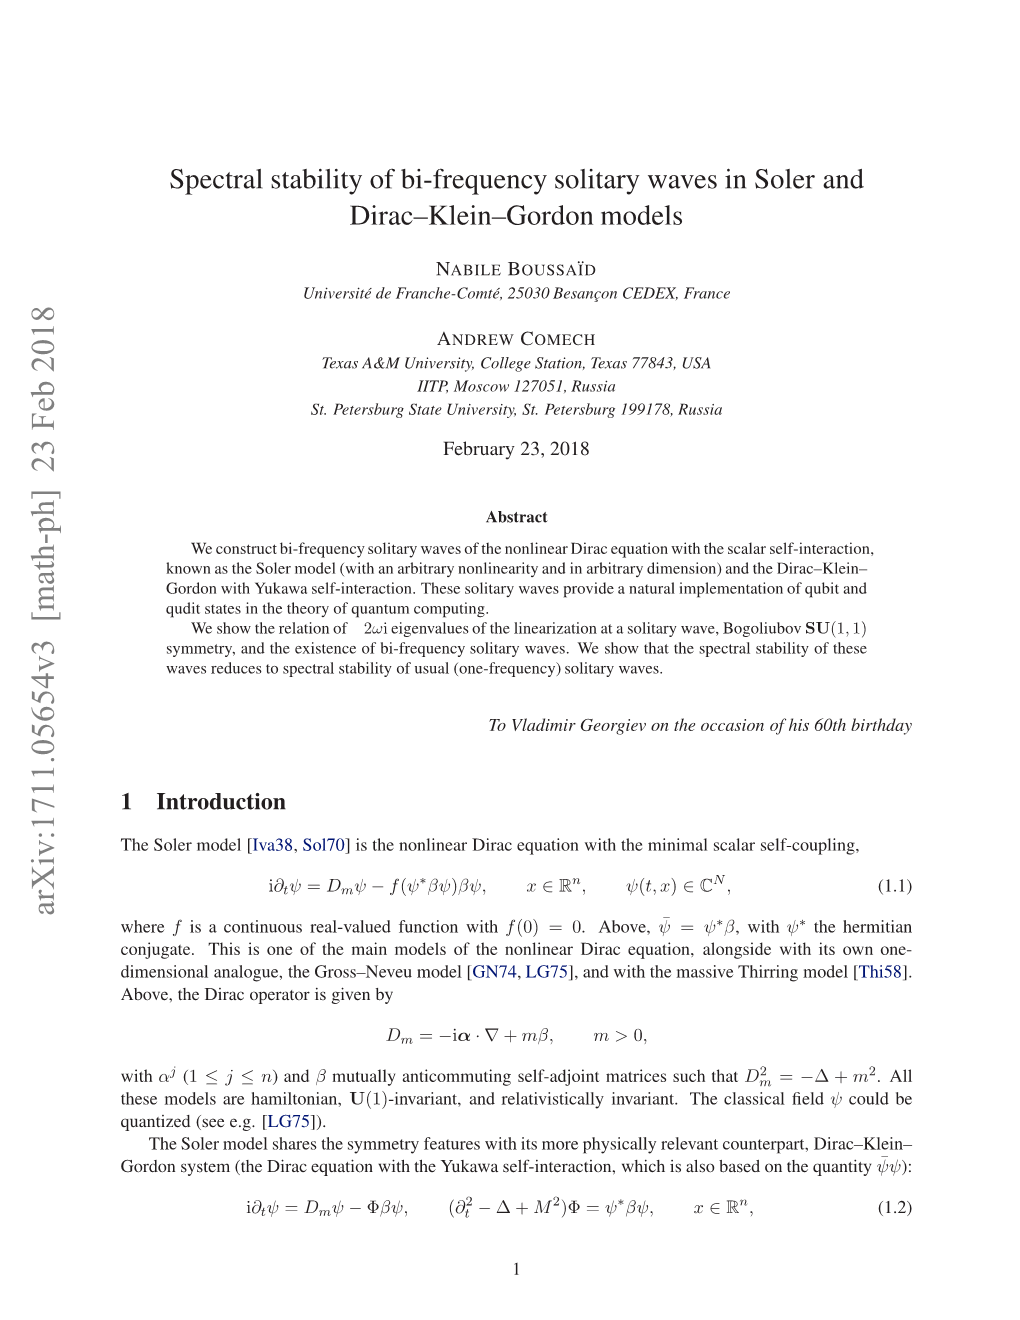 Spectral Stability of Bi-Frequency Solitary Waves in Soler and Dirac